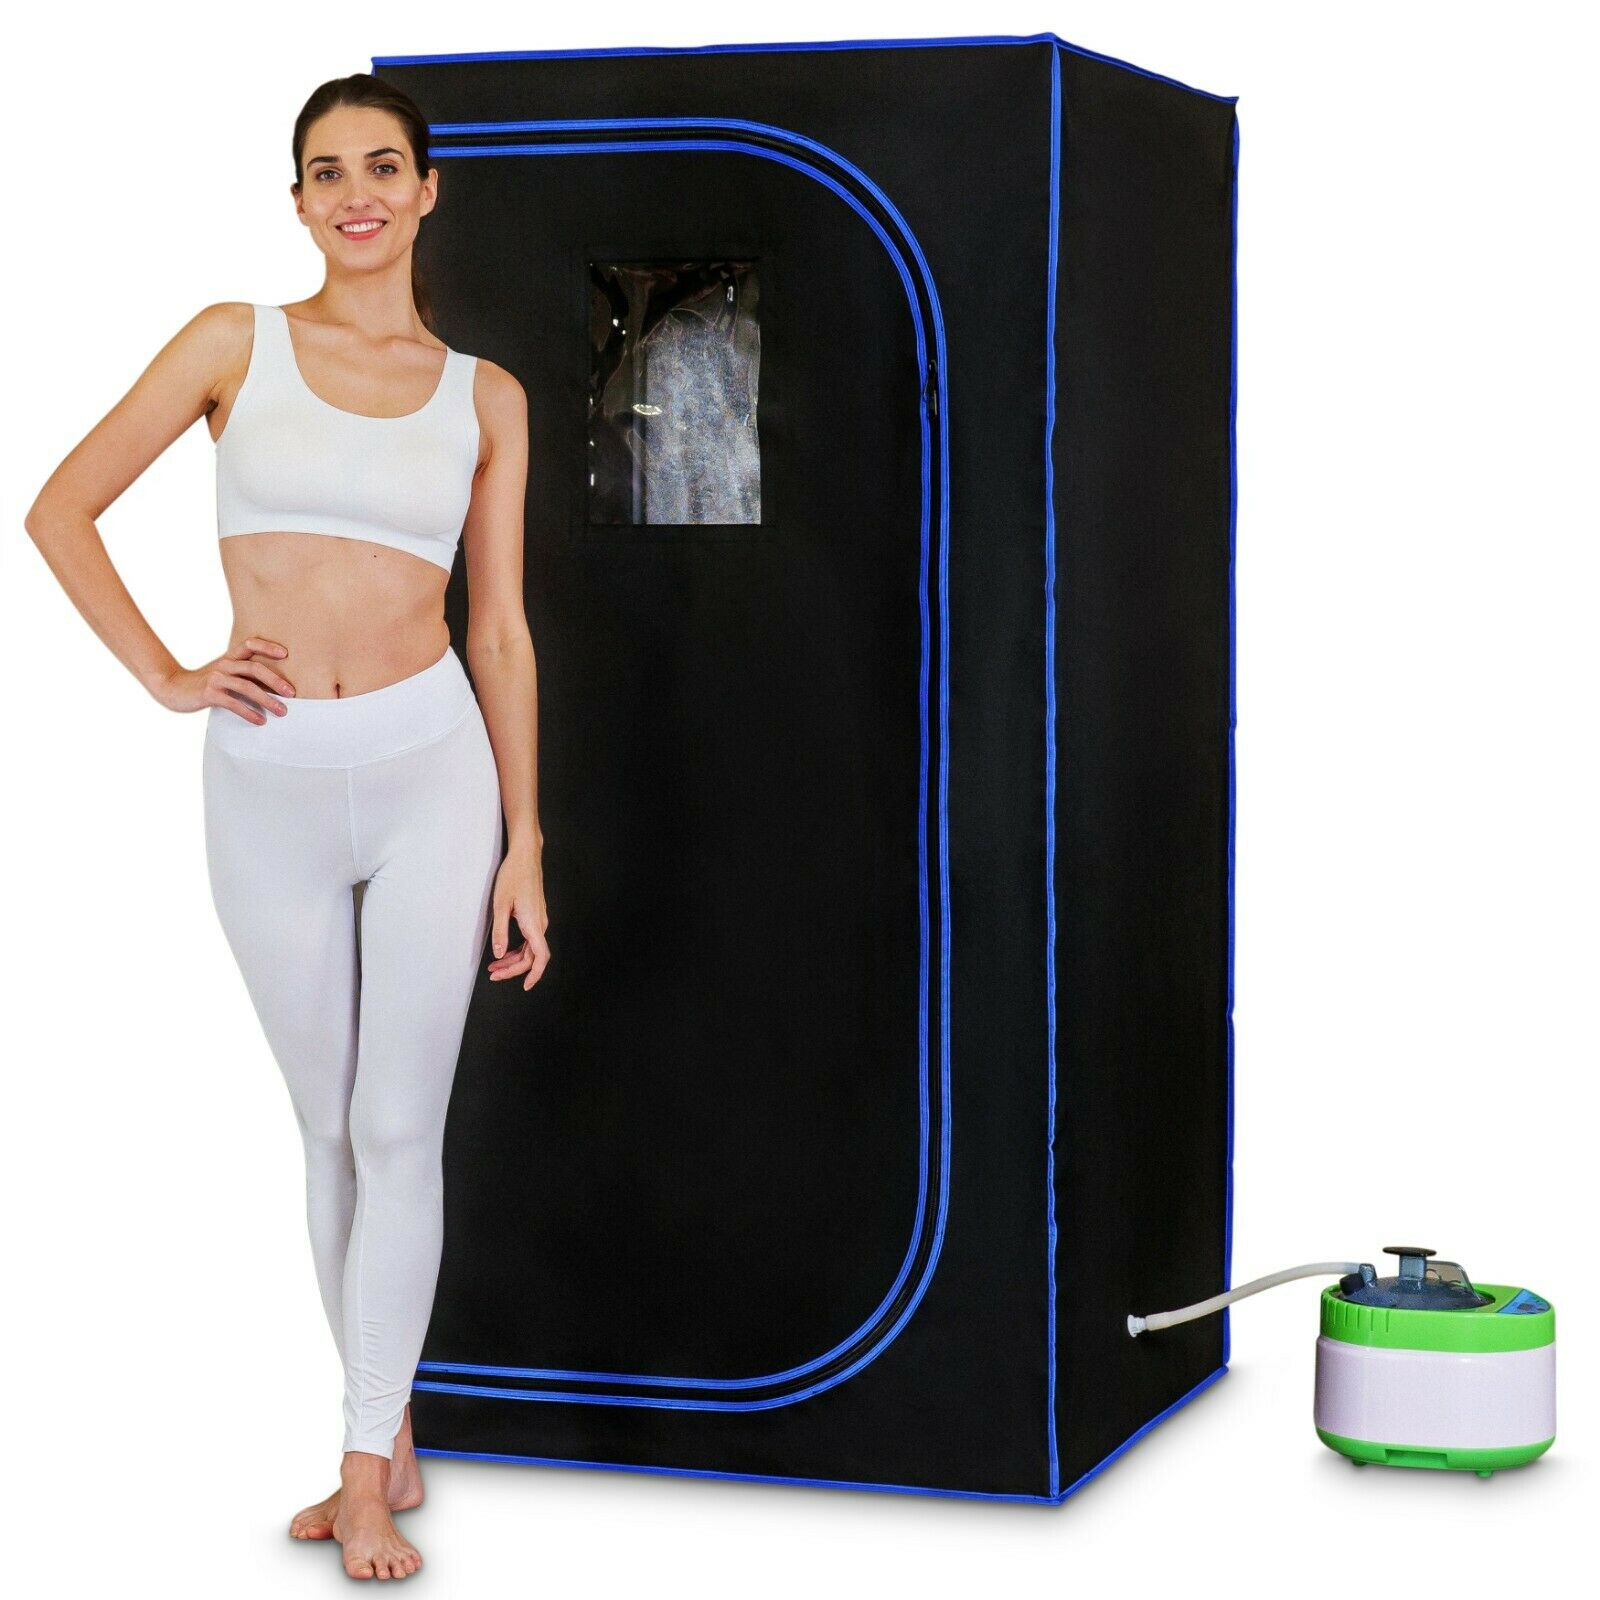 Pyle Slisau35bk Portable Personal In-home Detox Spa Steam Therapy Heated Sauna